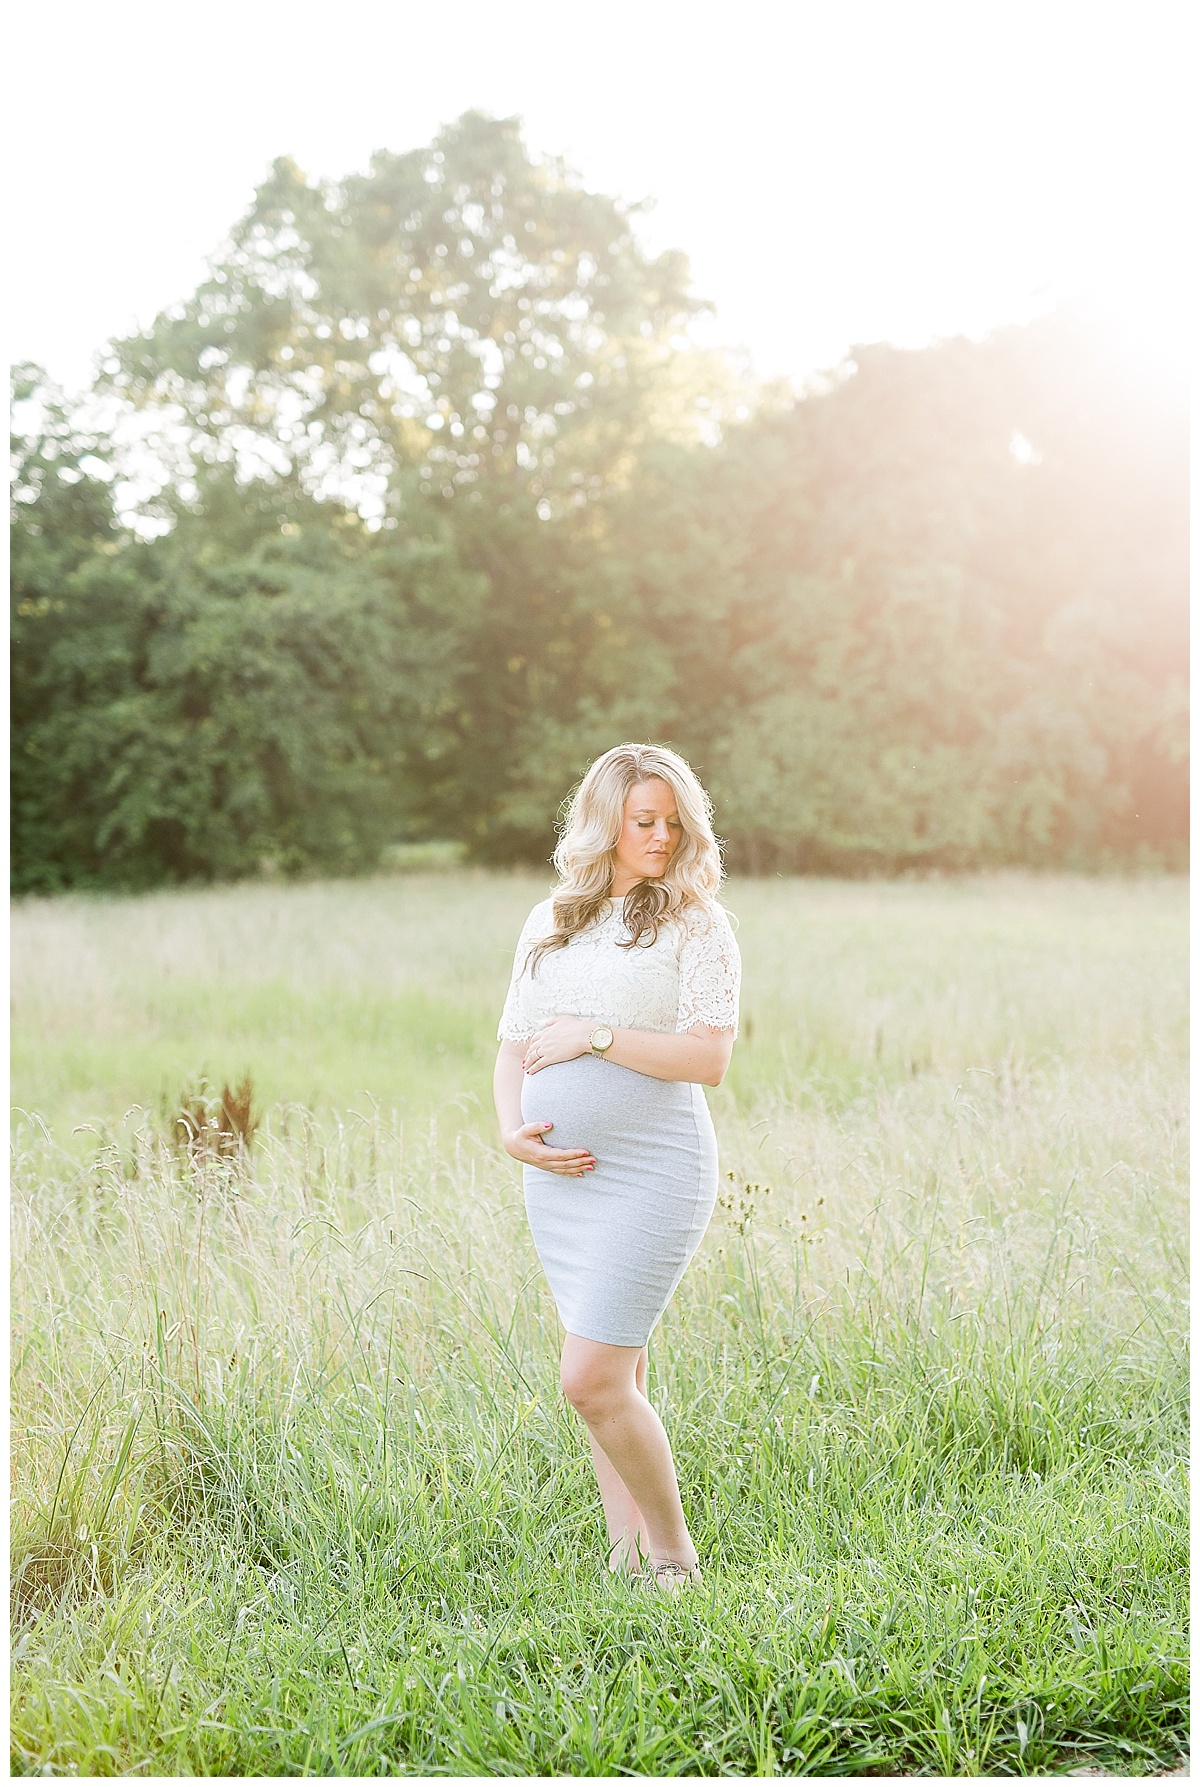 country maternity photoshoot, meadow pictures, petersburg virginia, virginia maternity photographer, virginia photographer, prince george photographer, maternity, baby bump pictures, caiti garter photography